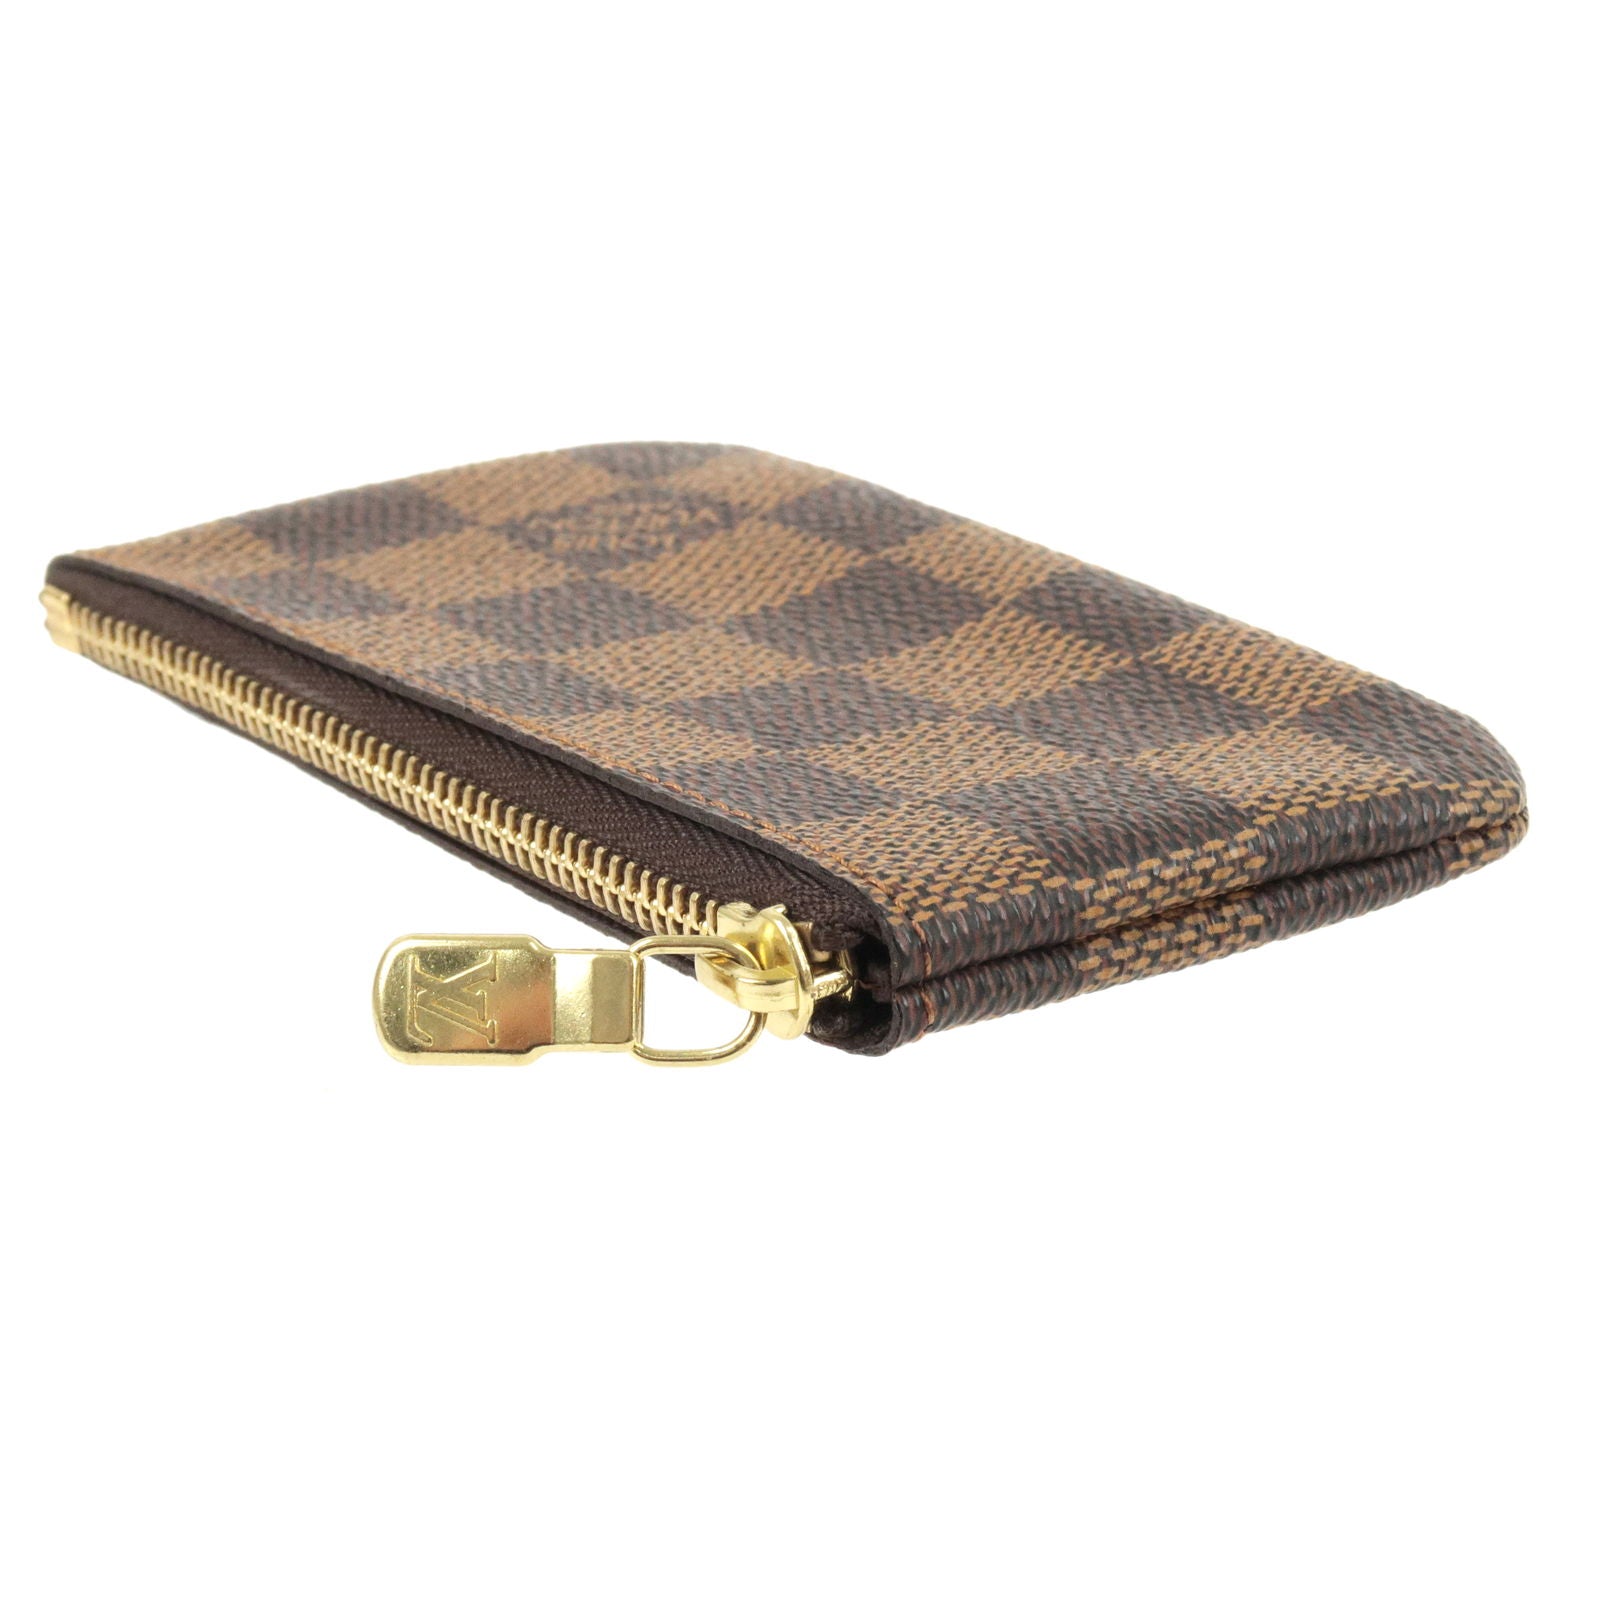 Louis Vuitton 2011 pre-owned Damier Azur Zipped Cosmetic Pouch